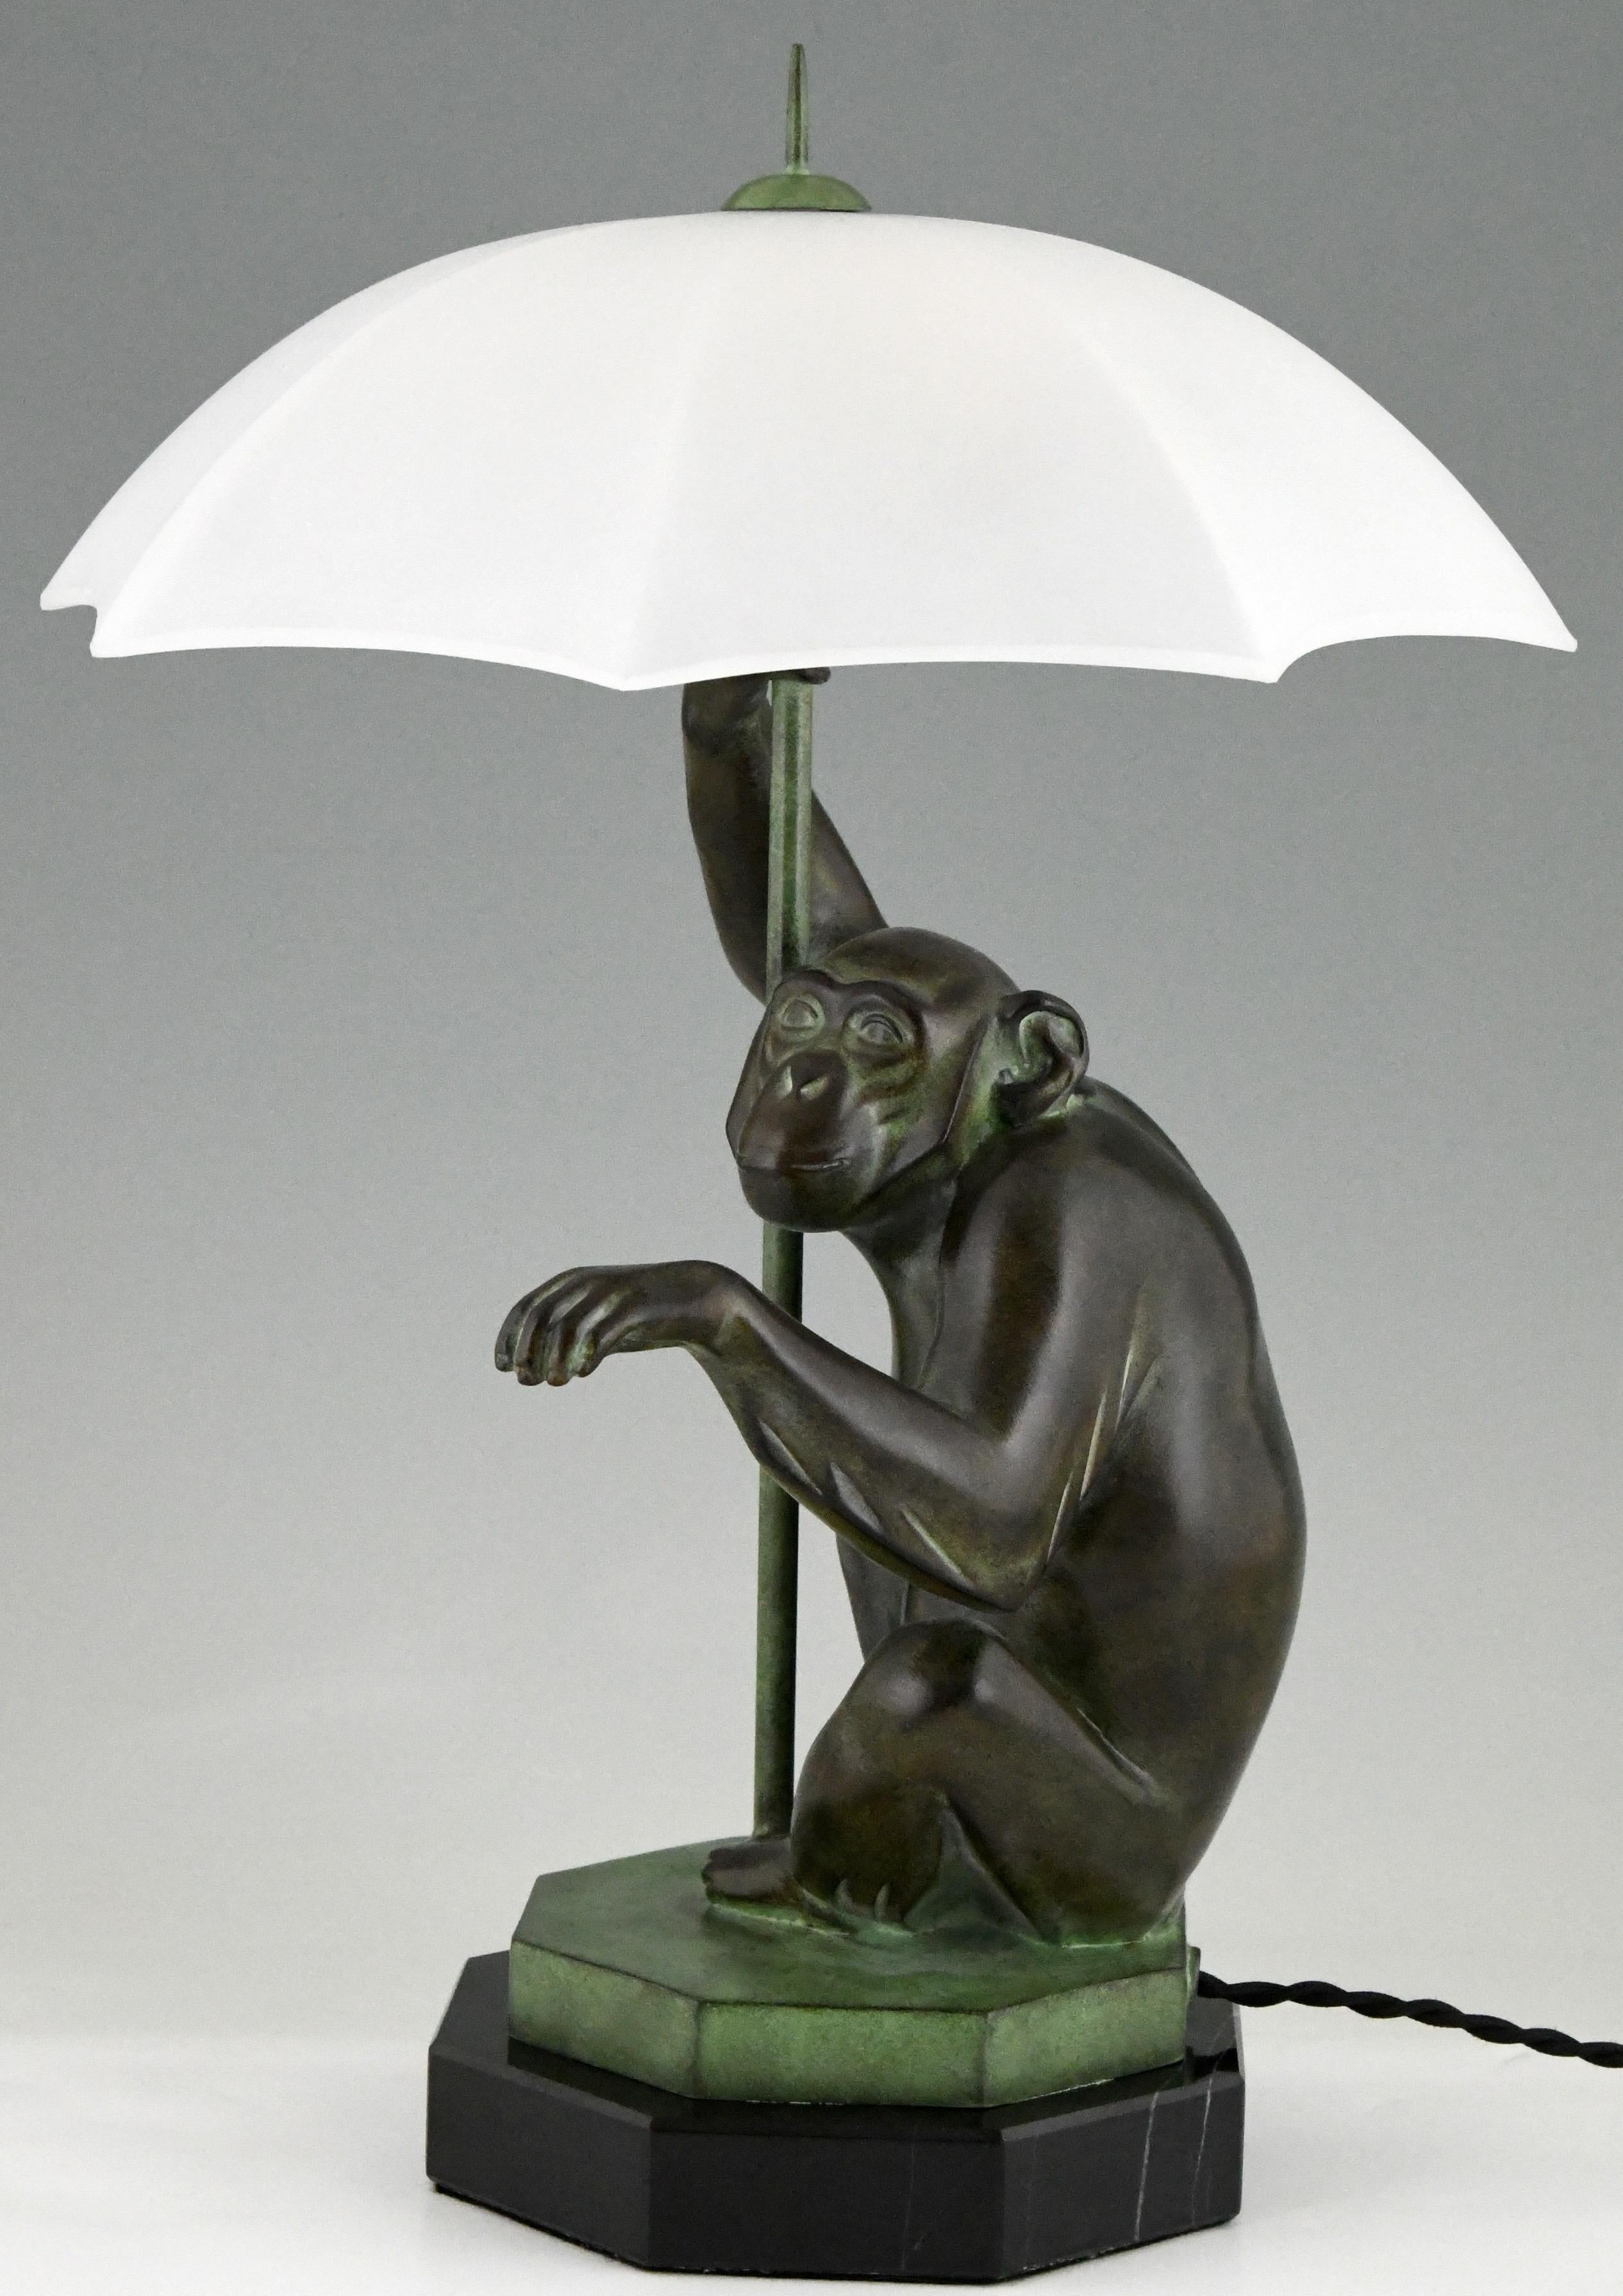 French Art Deco Style Table Lamp Monkey with Umbrella by Max Le Verrier France